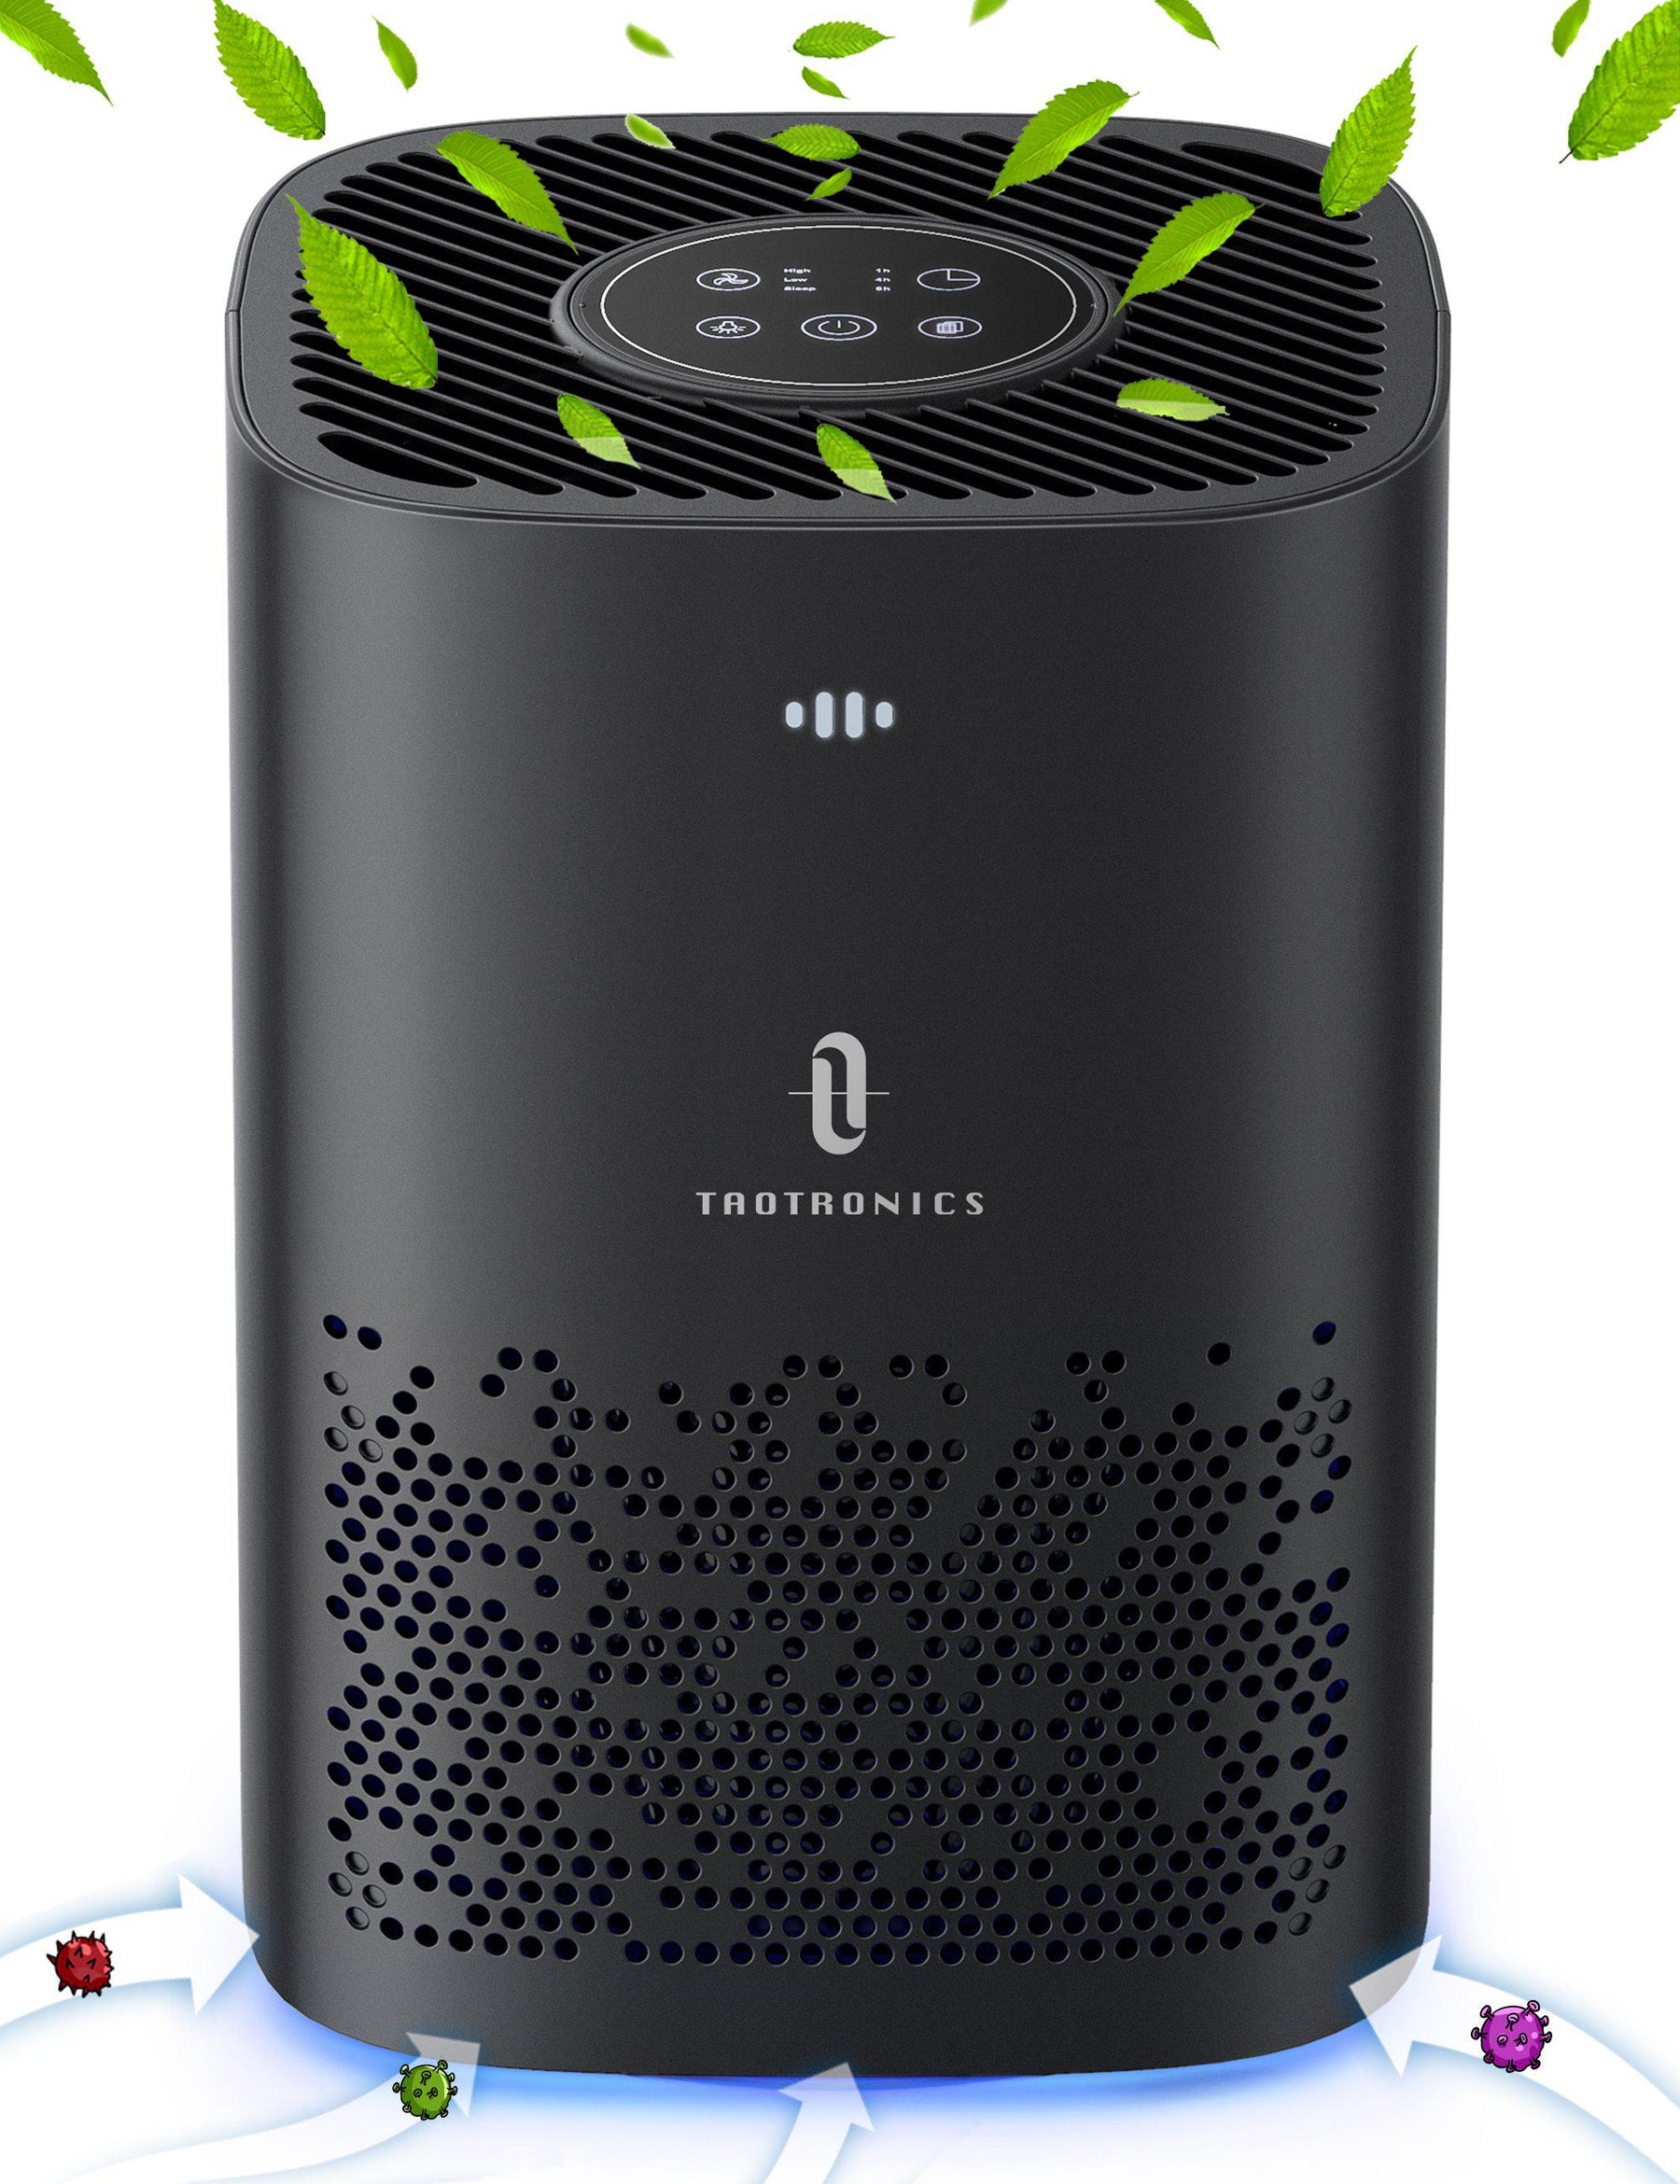 Air Purifier for Home, Quiet 24db for 224 sq.ft, Remove 99.97% Smoke, Allergies